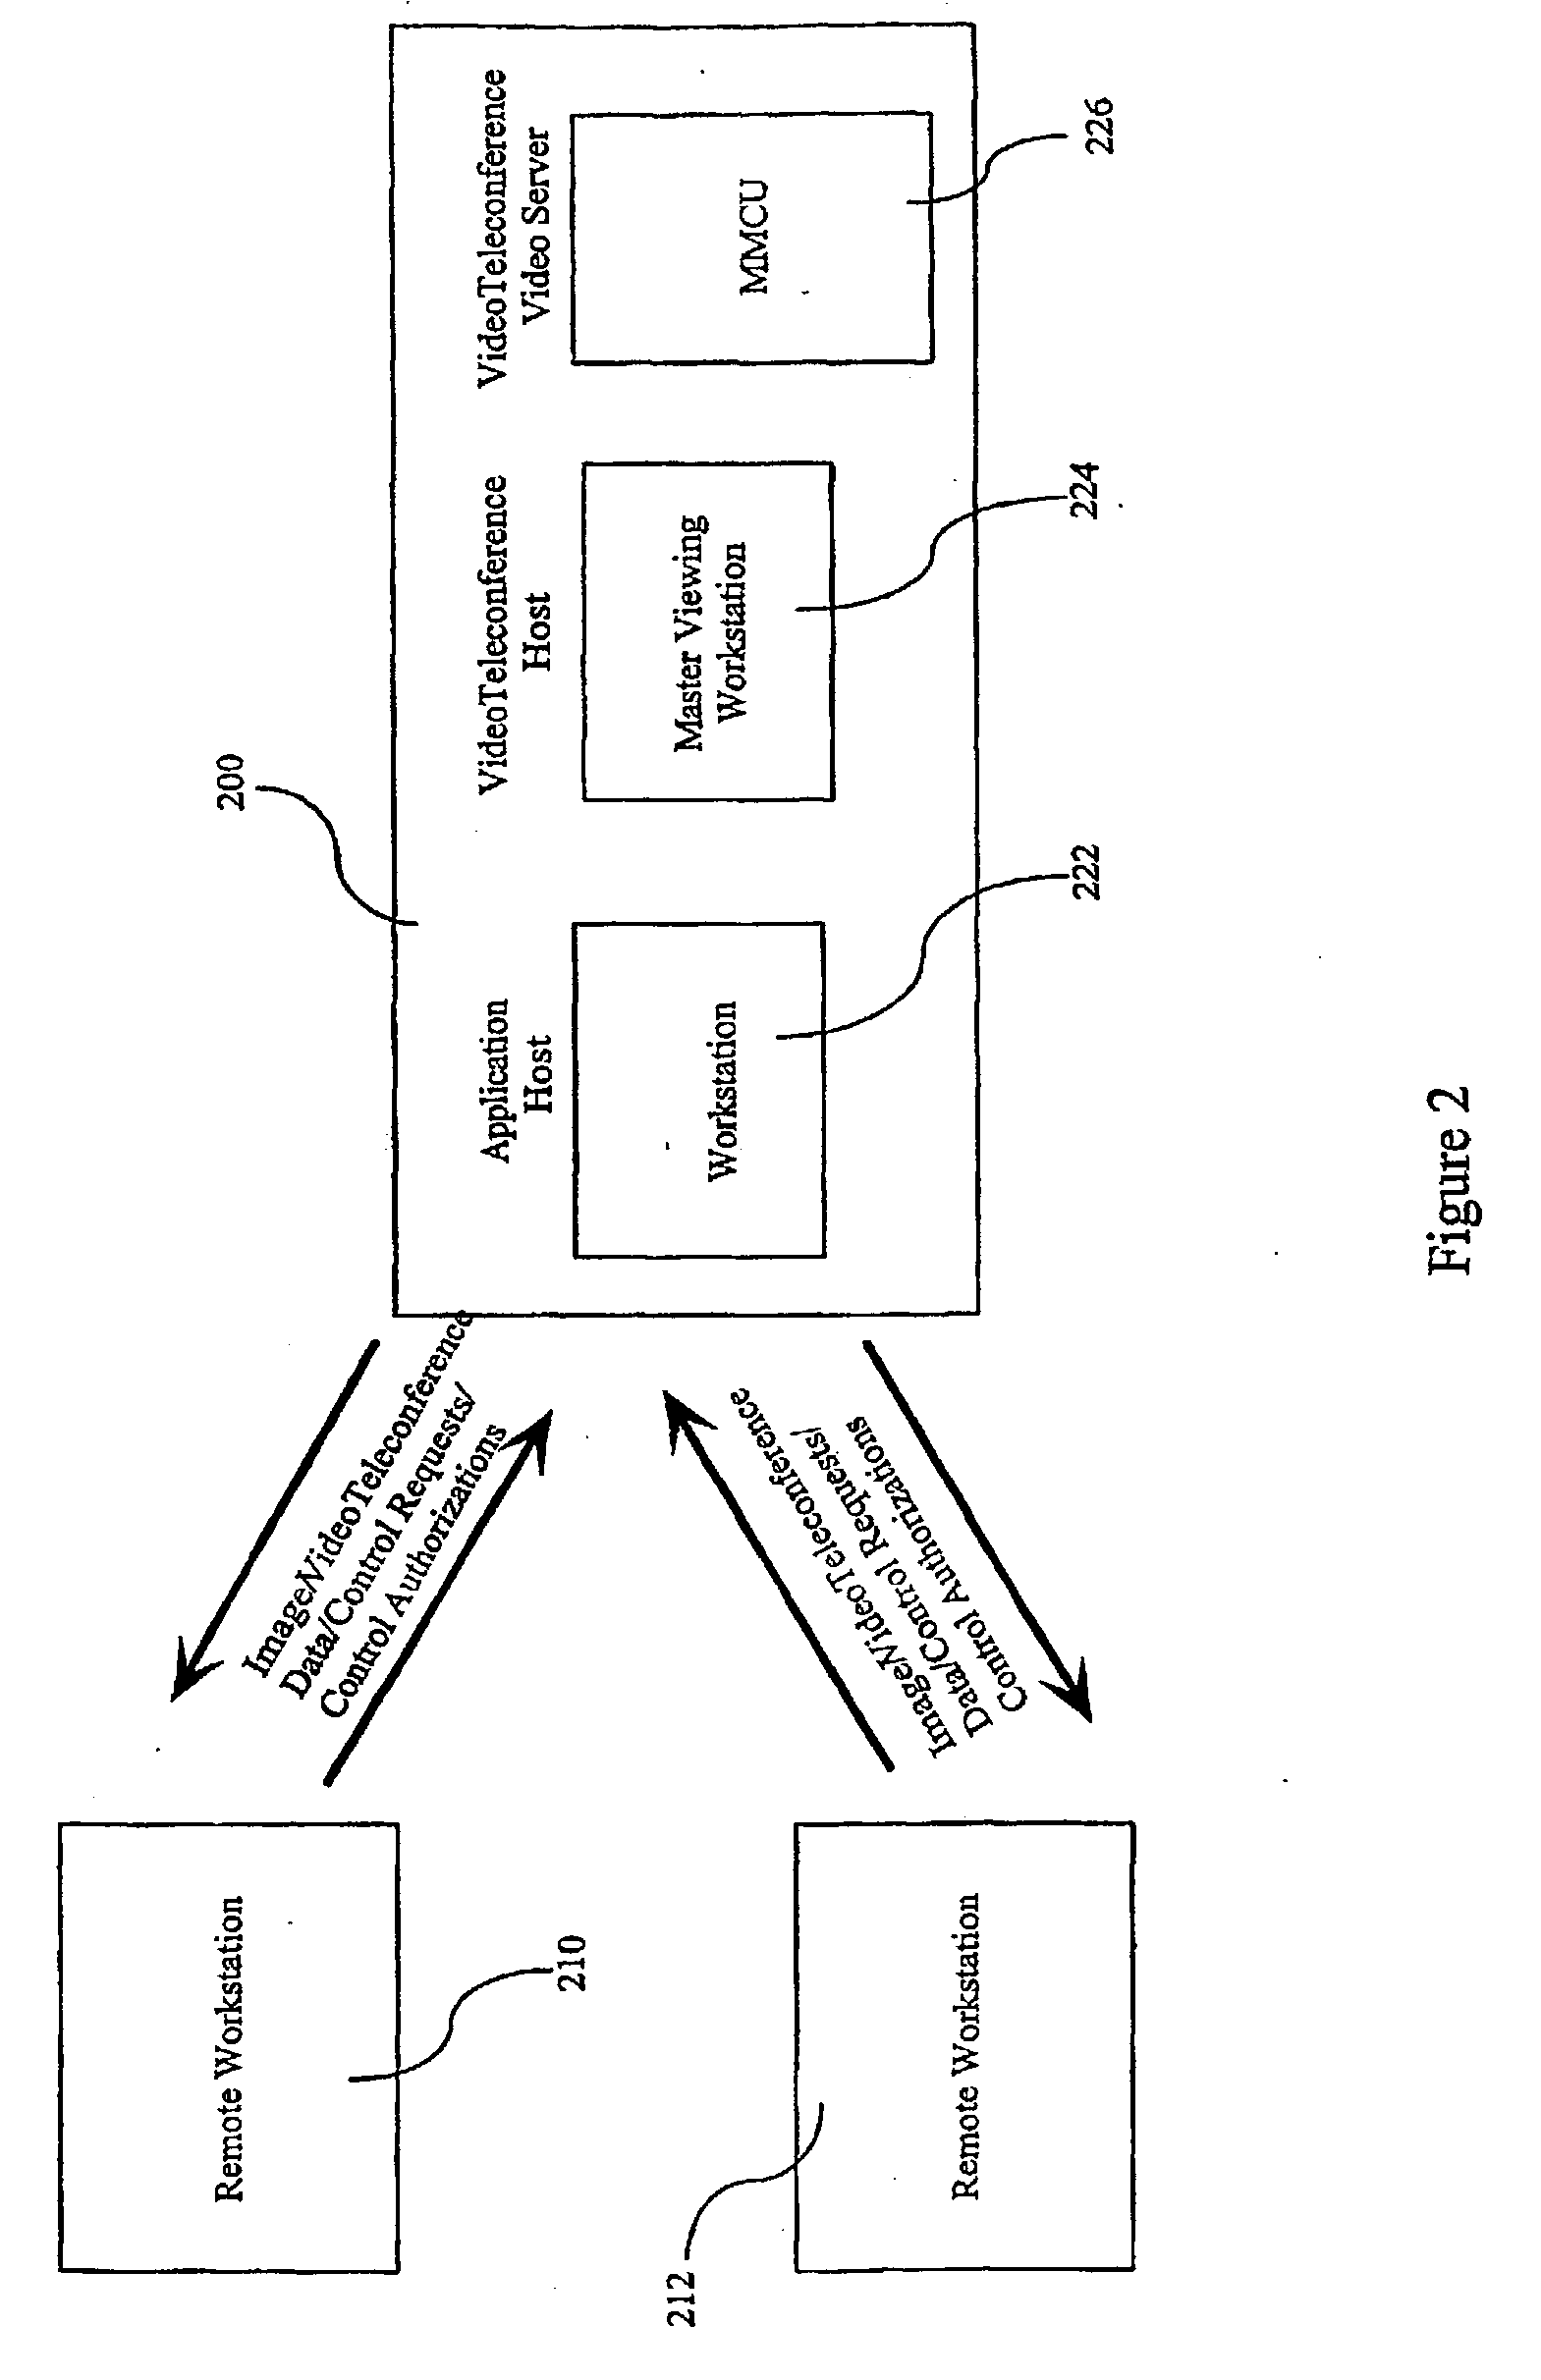 Cooperative planning system and method